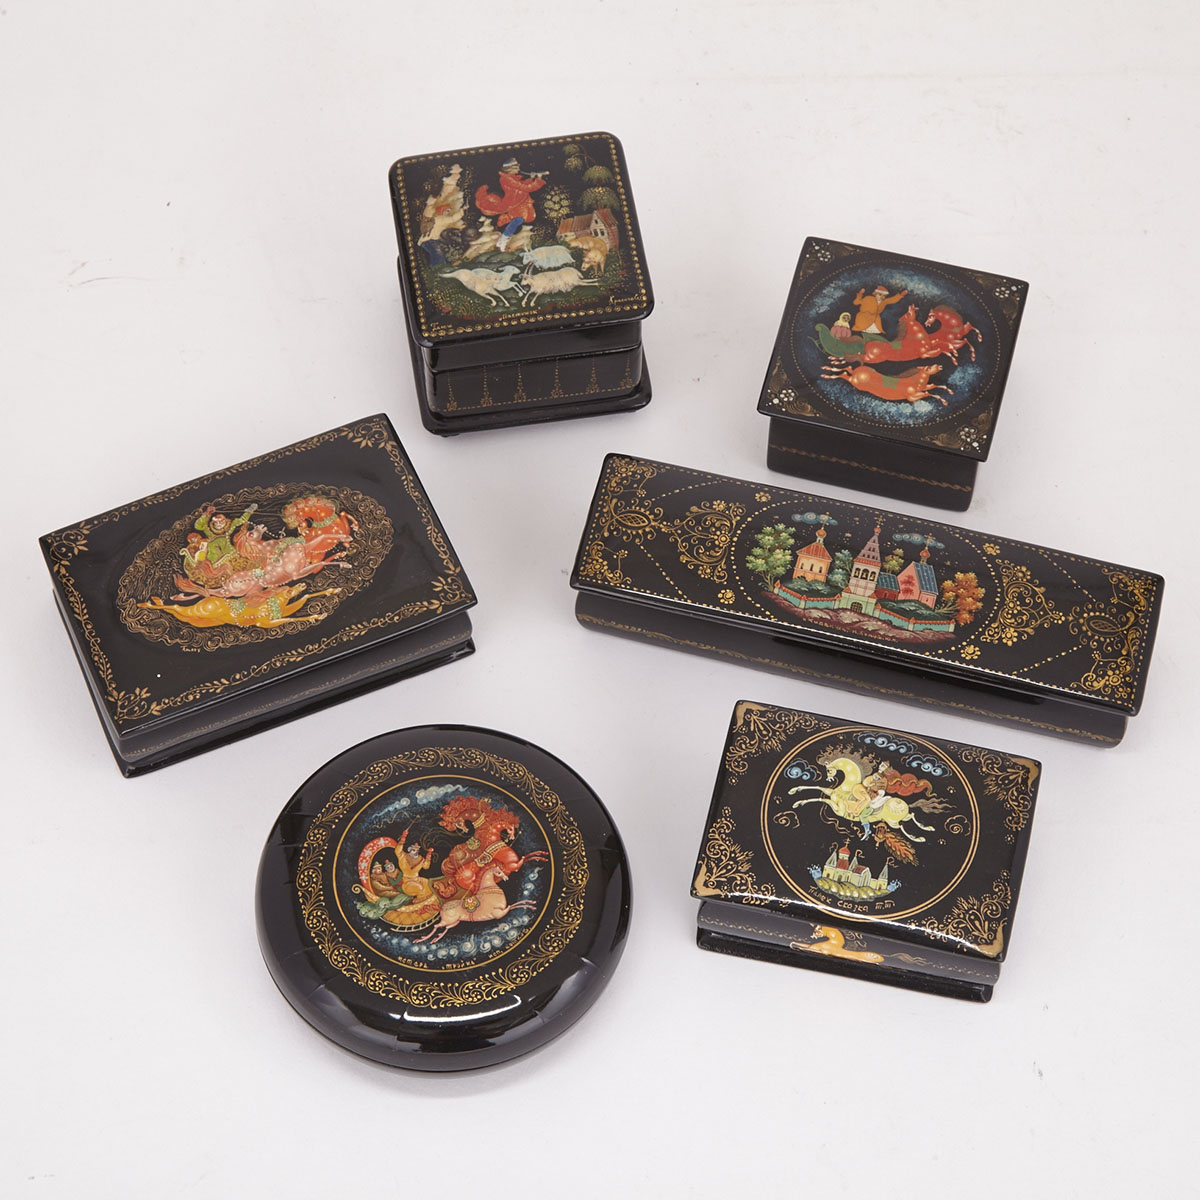 Collection of Six Soviet Russian Lacquer Boxes, Palekh, 20th century